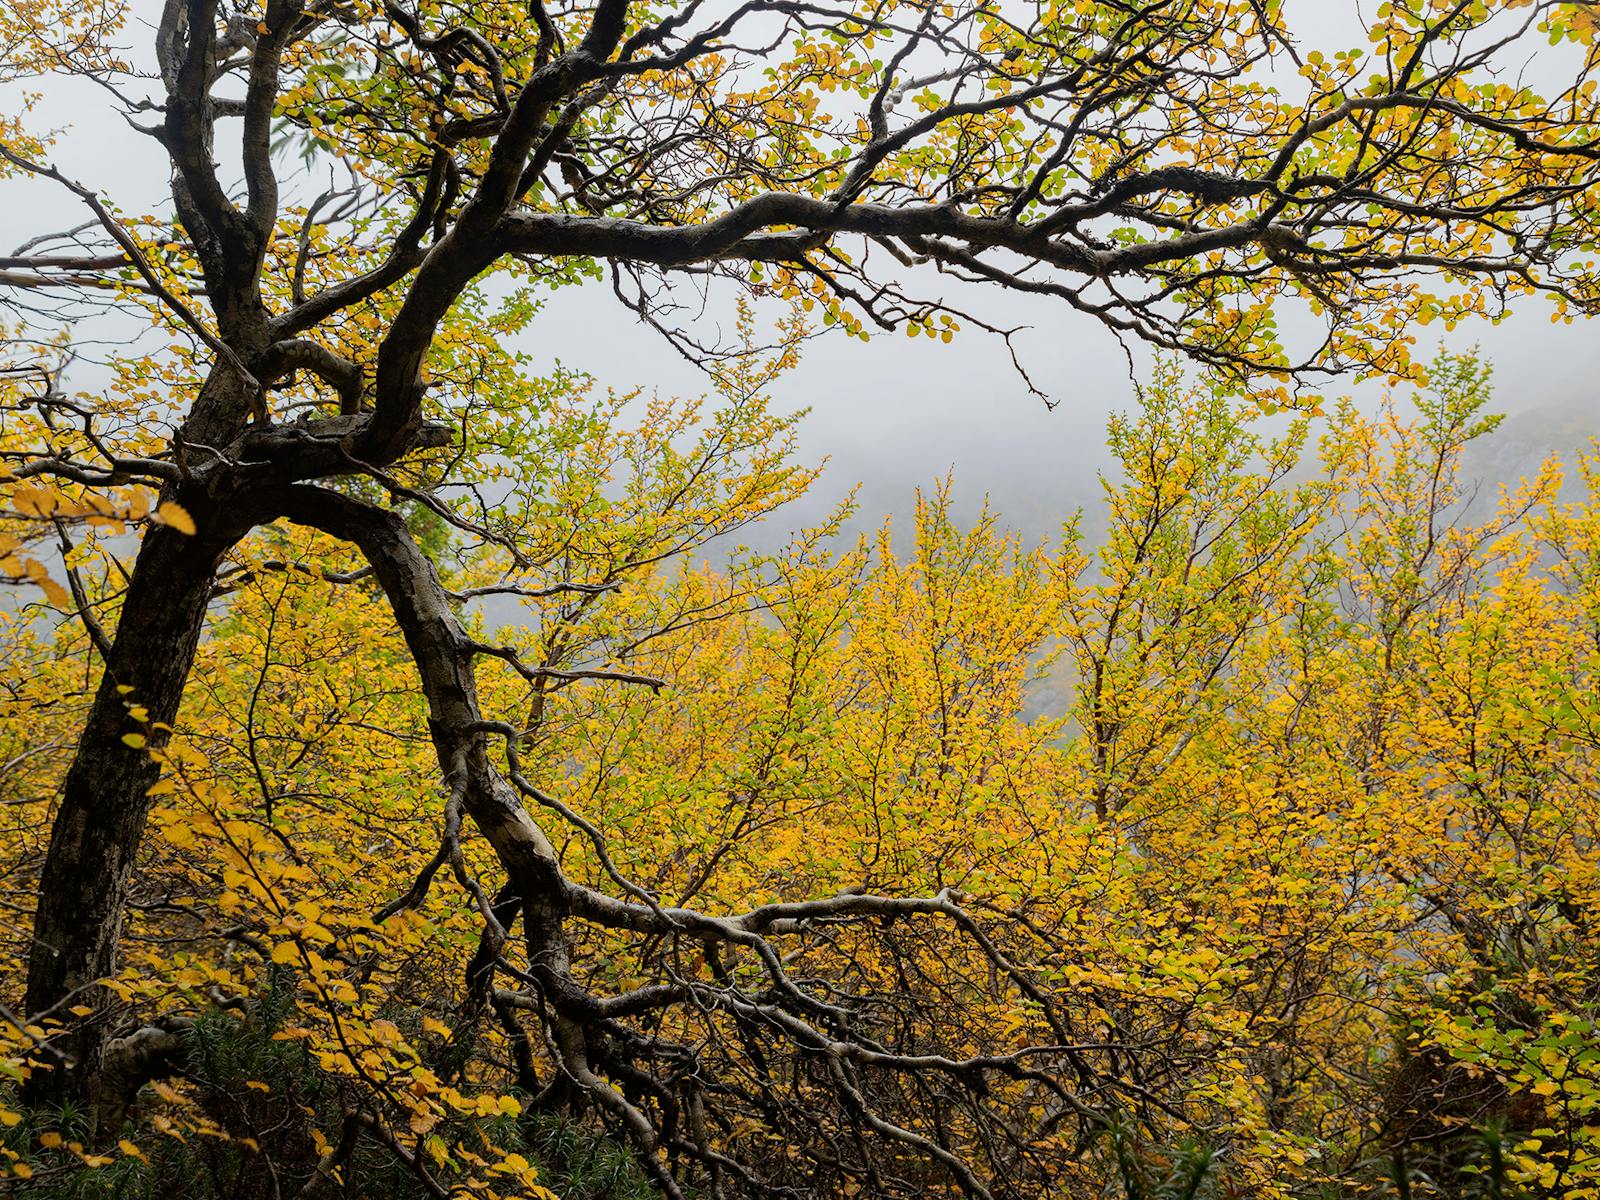 Yellow autumn leaves on Tasmania's deciduous beech at Crater Lake near Cradle Mountain